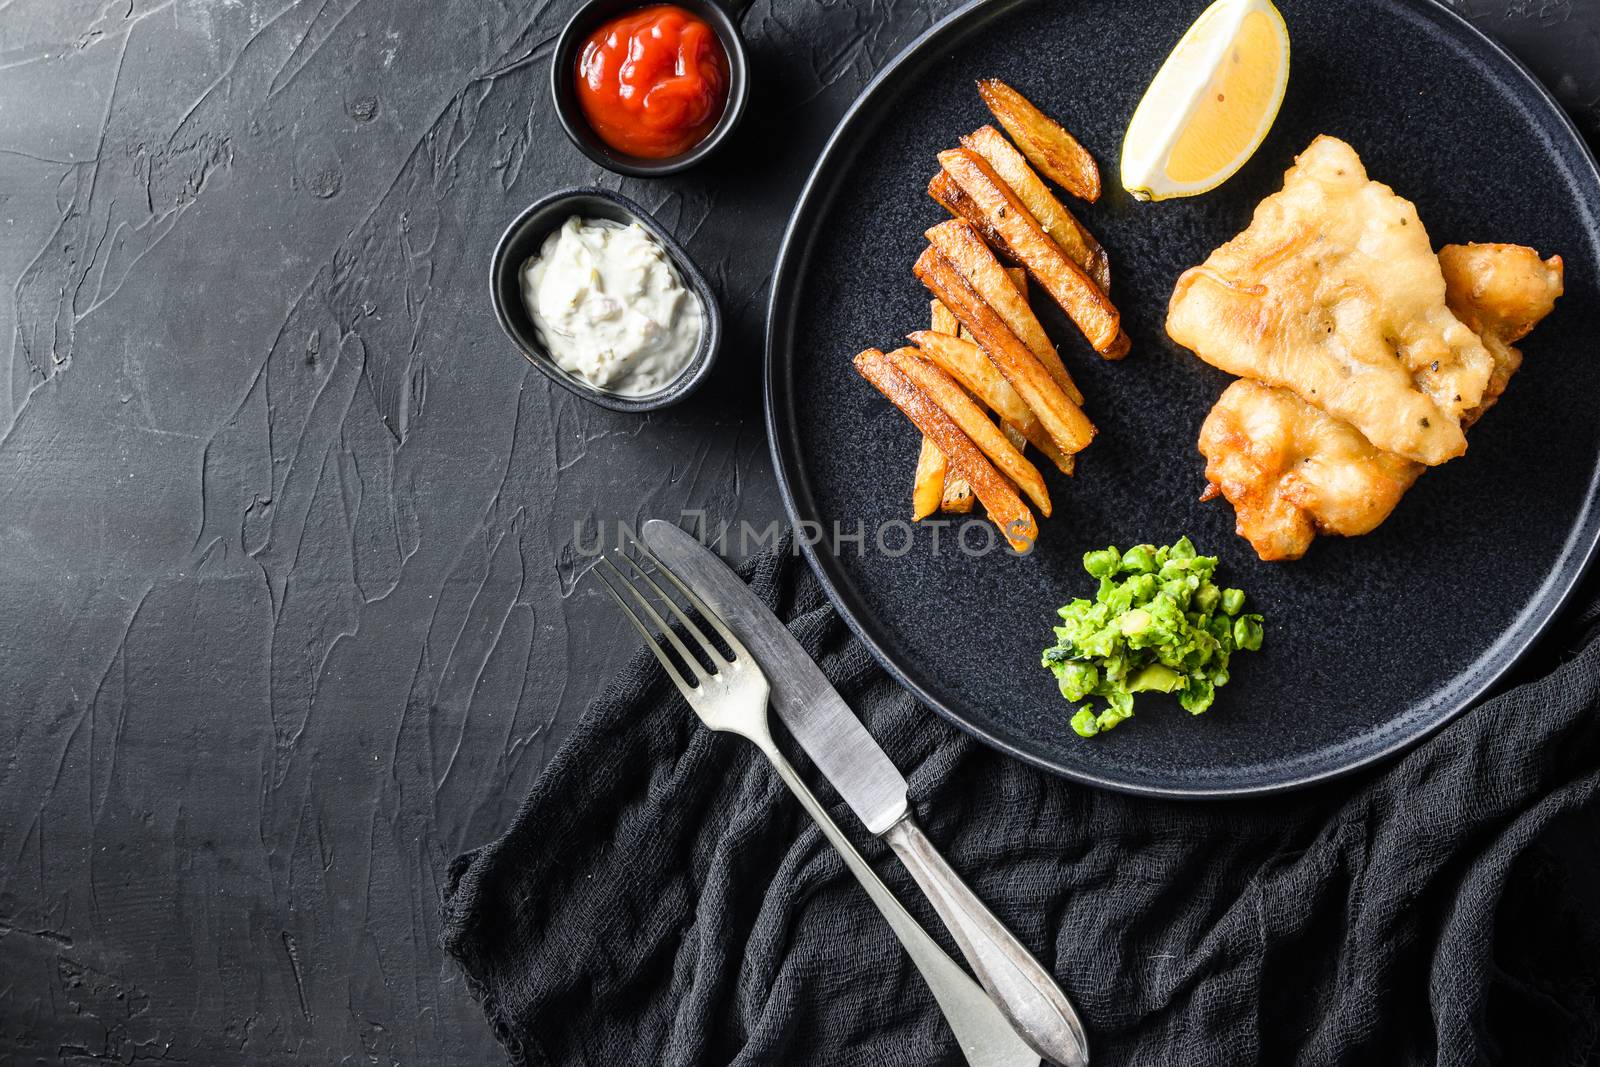 Fish chips with dip and lemon - fried cod, french fries, lemon slices, tartar sauce, ketchup tomatoe and mushy peas with fork and knife on black plate over black background top view space for text by Ilianesolenyi